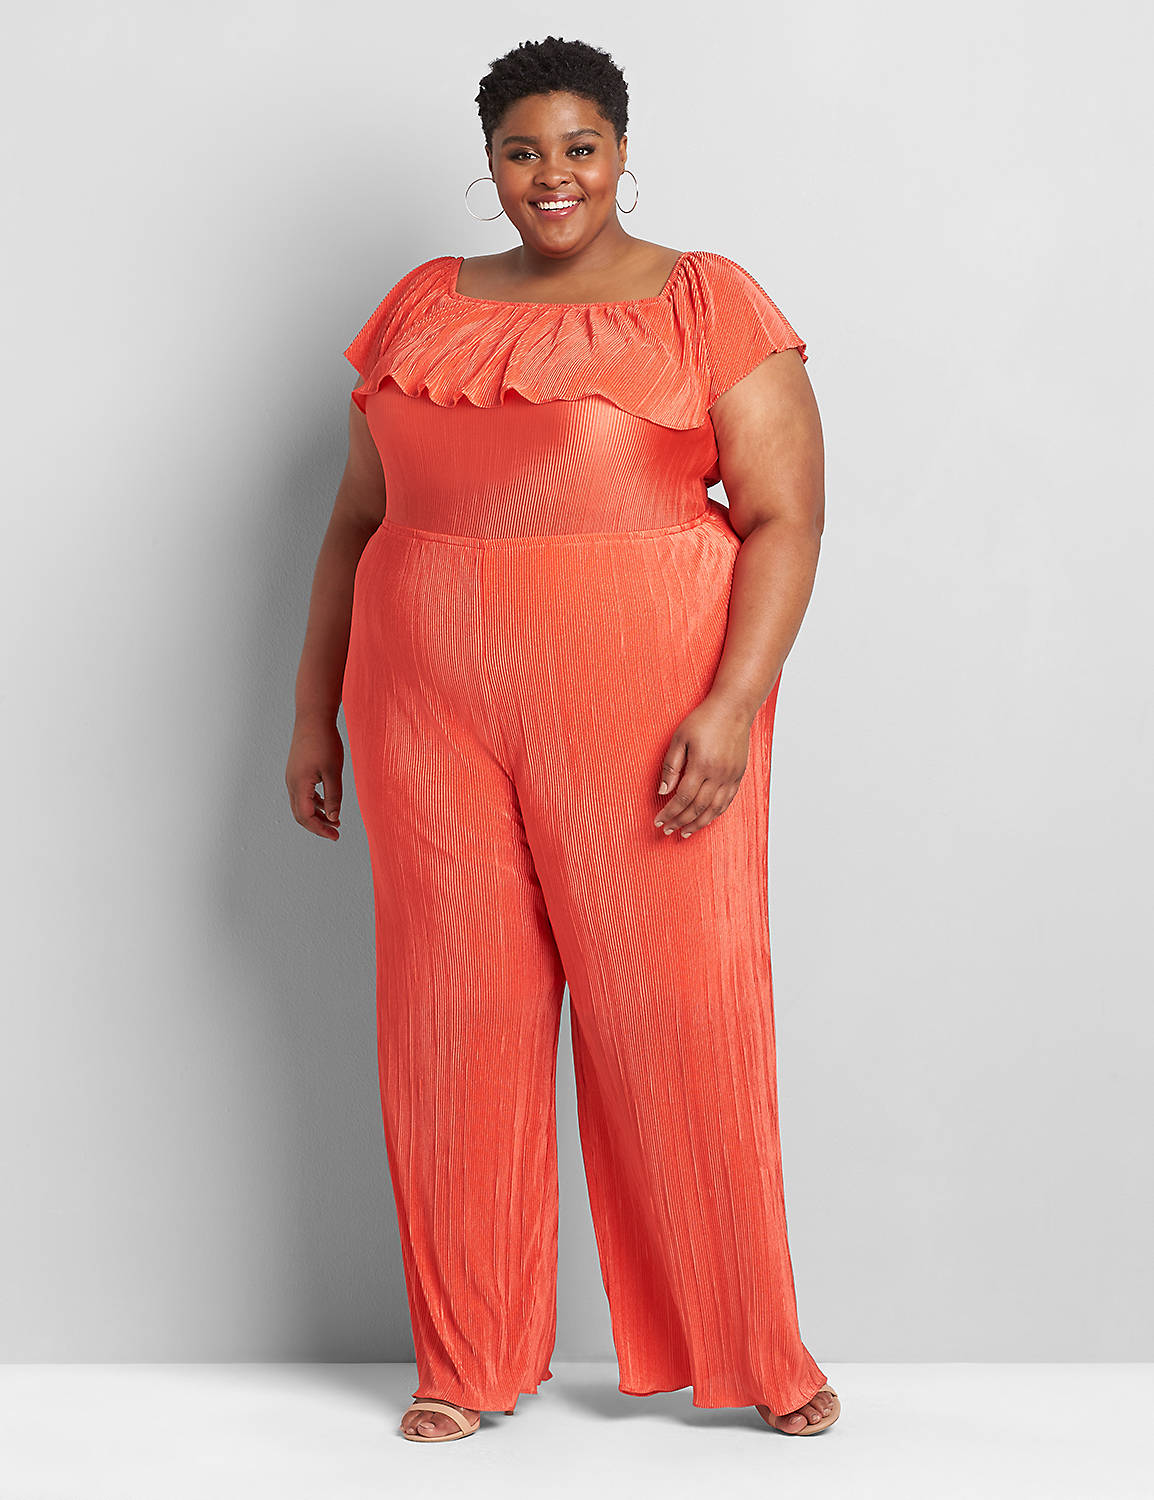 4 Way Off The Shoulder Micro Pleated Jumpsuit 1118579:Starfish Coral CSI 0301184:14/16 Product Image 3